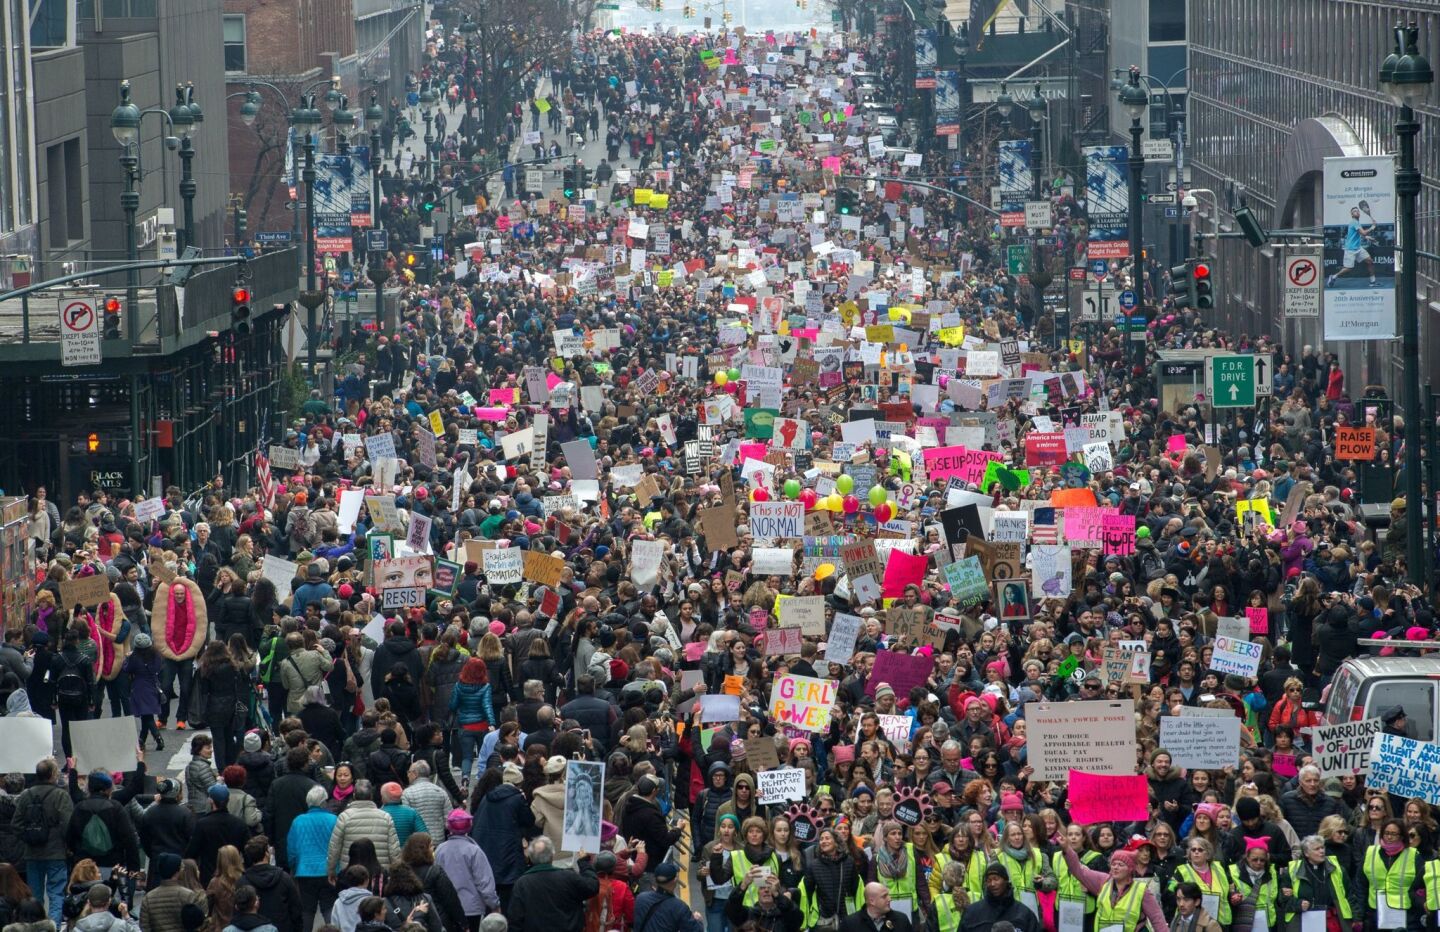 Protesters march in New York during the women's march on Jan. 21.